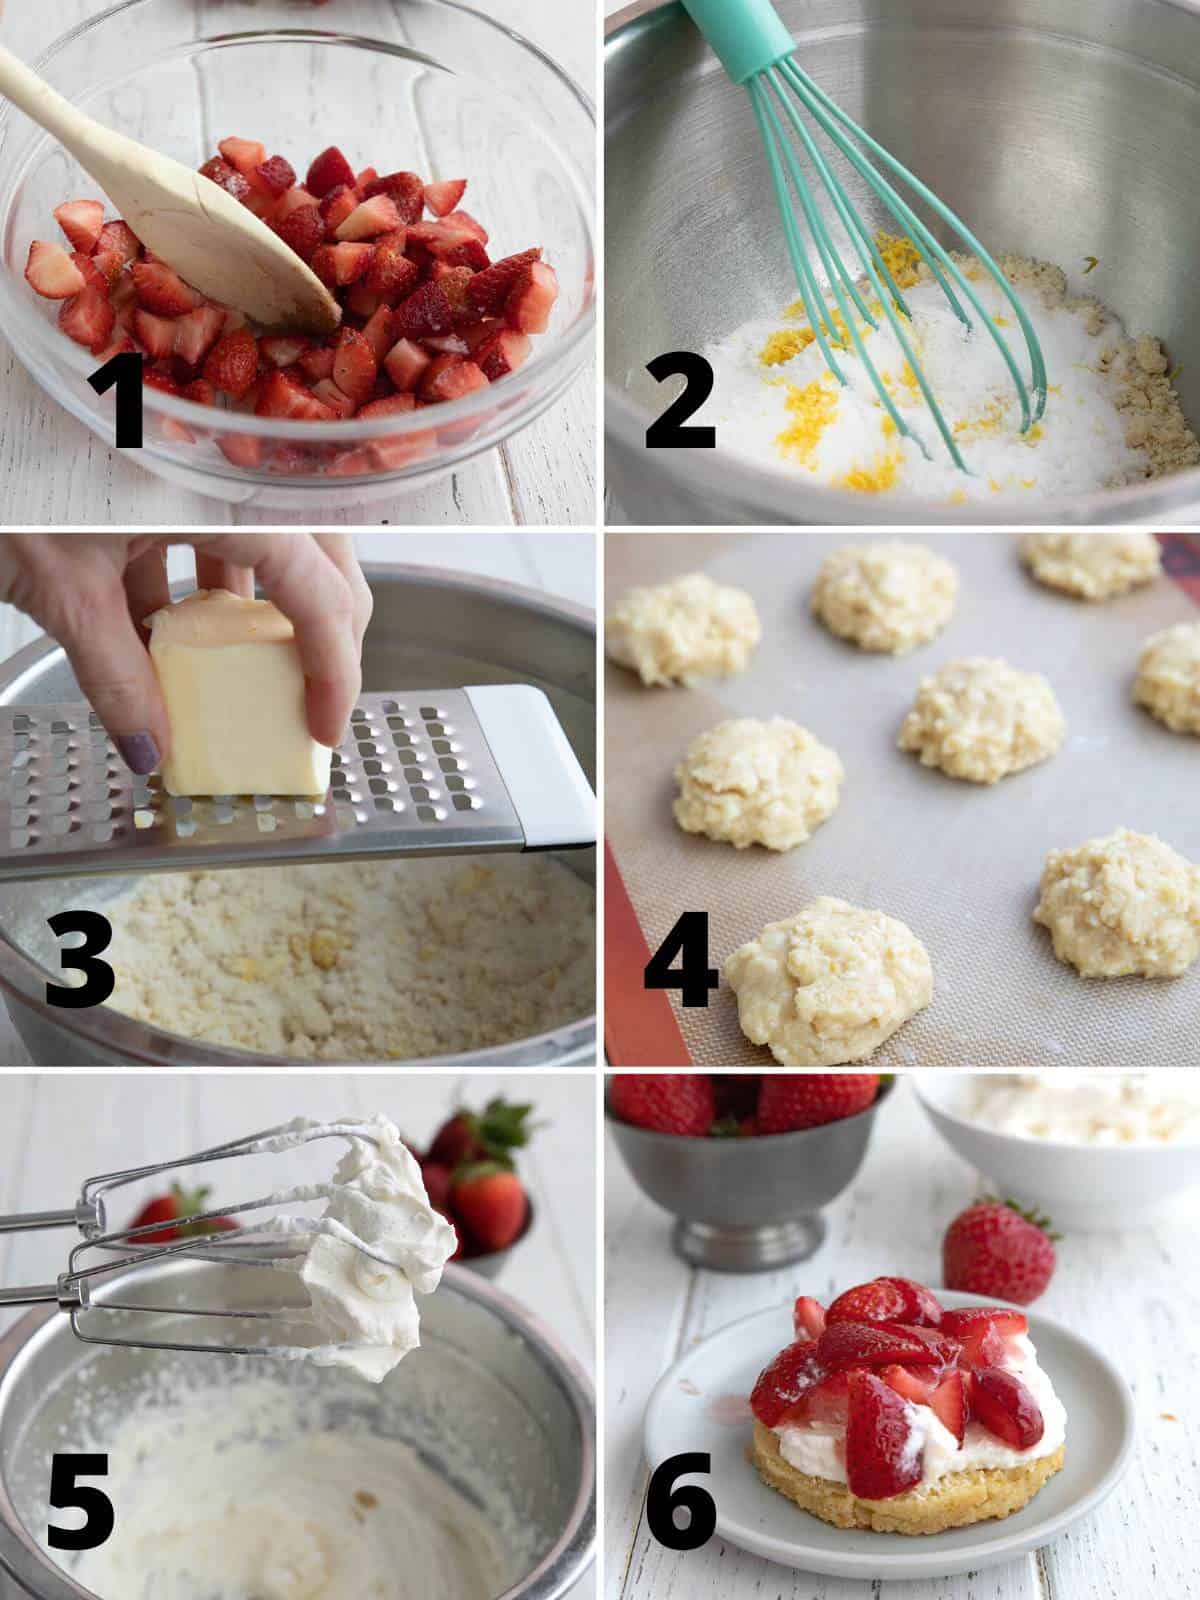 A collage of 6 images showing Keto Strawberry Shortcake.